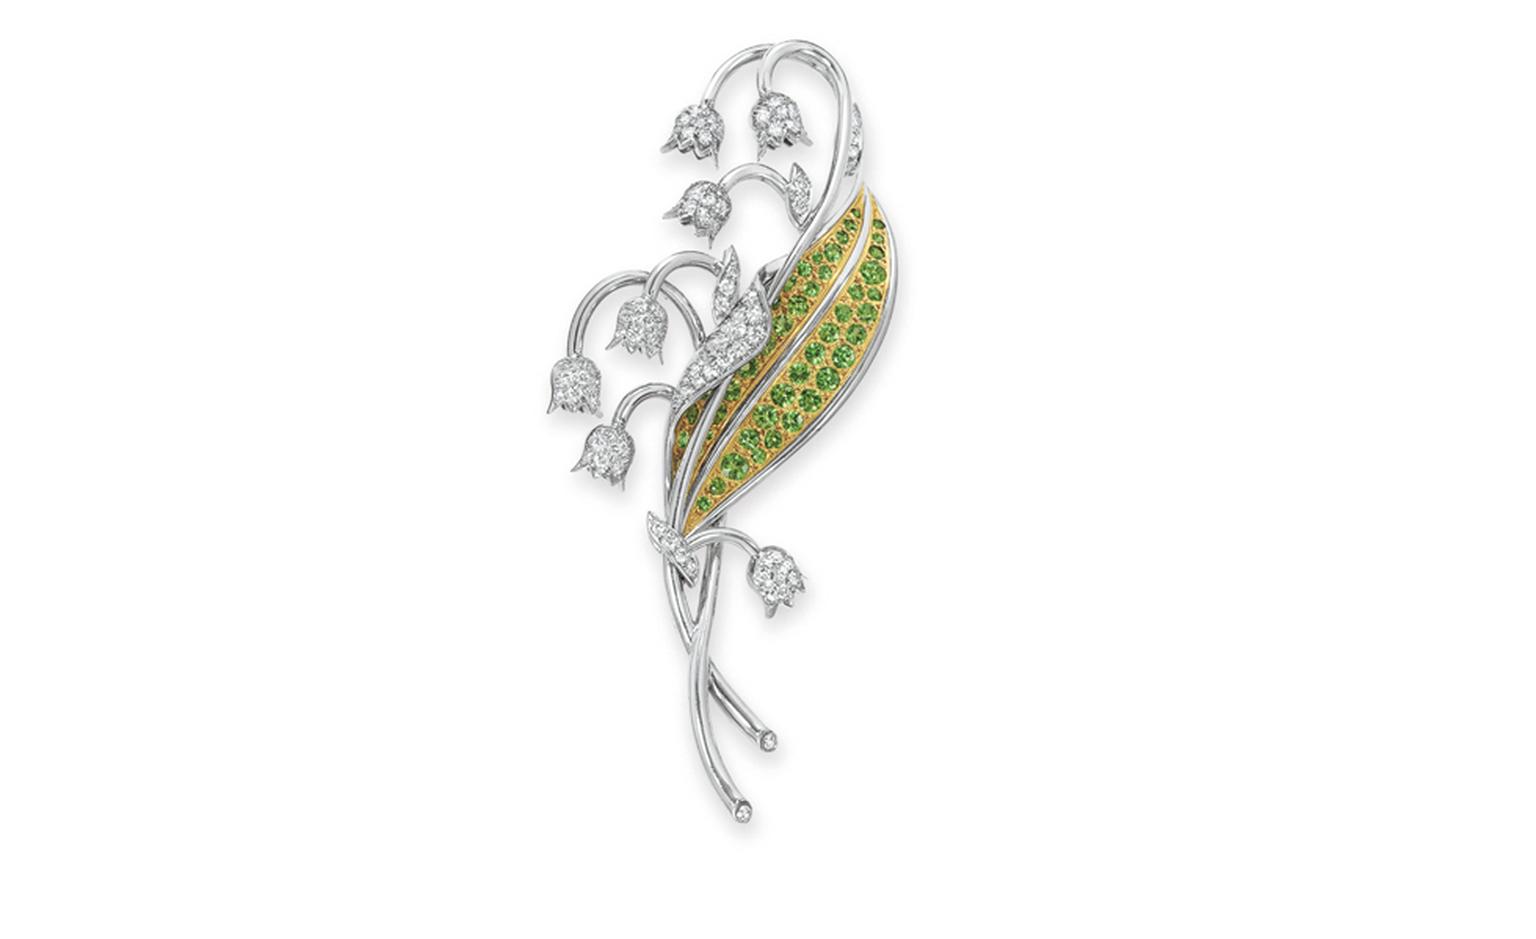 Lot 123. A diamond and tsavorite garnet ''Lilly of te Valley'' brooch, by Tiffany & Co. Estimate 3,000 - 5,000 U.S. dollars. SOLD FOR $8,125